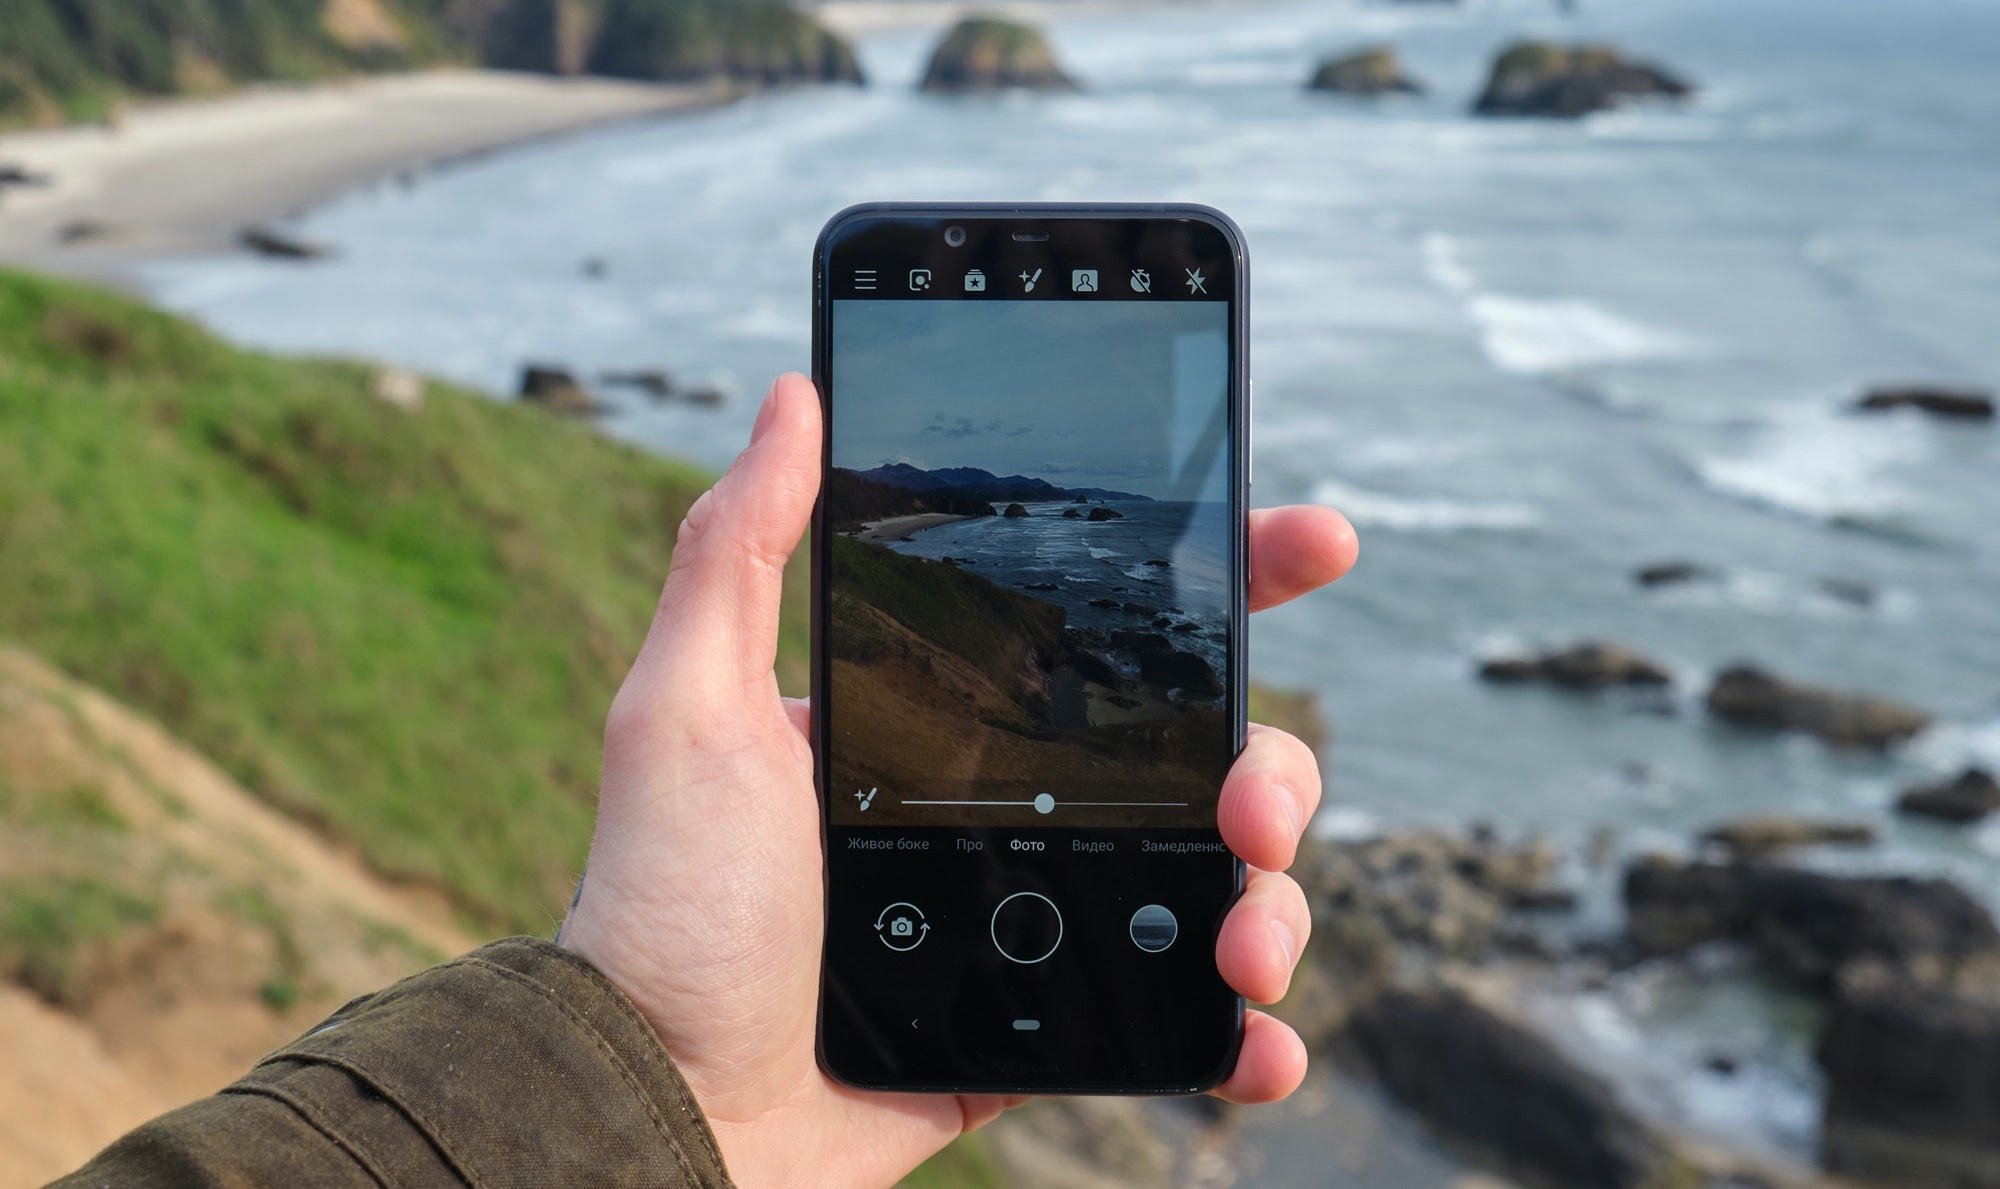 Photo showing a mobile phone, held in a hand, being used to take a photograph of a rugged coastline landscape.